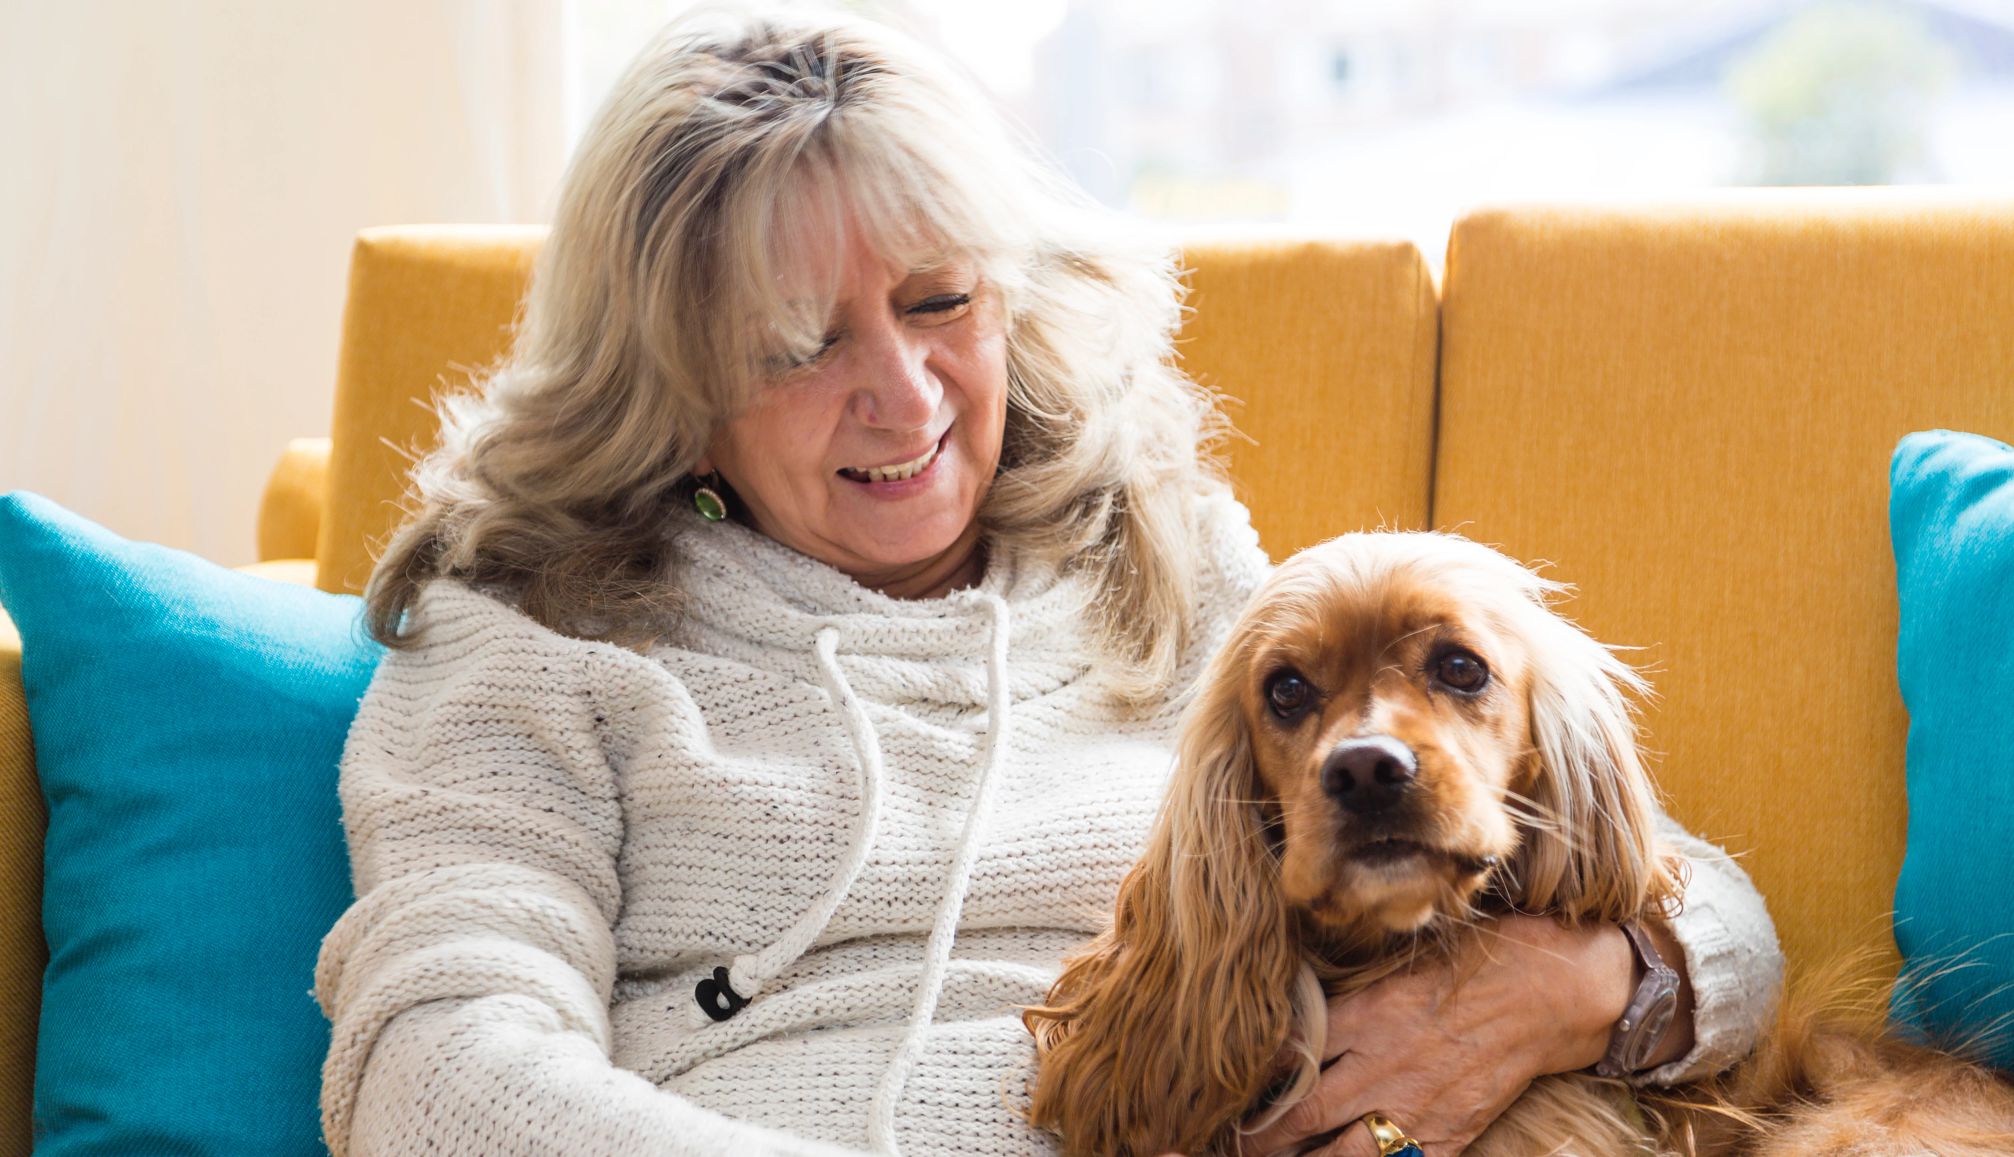 a woman cuddling with a Cocker spaniel on a couch